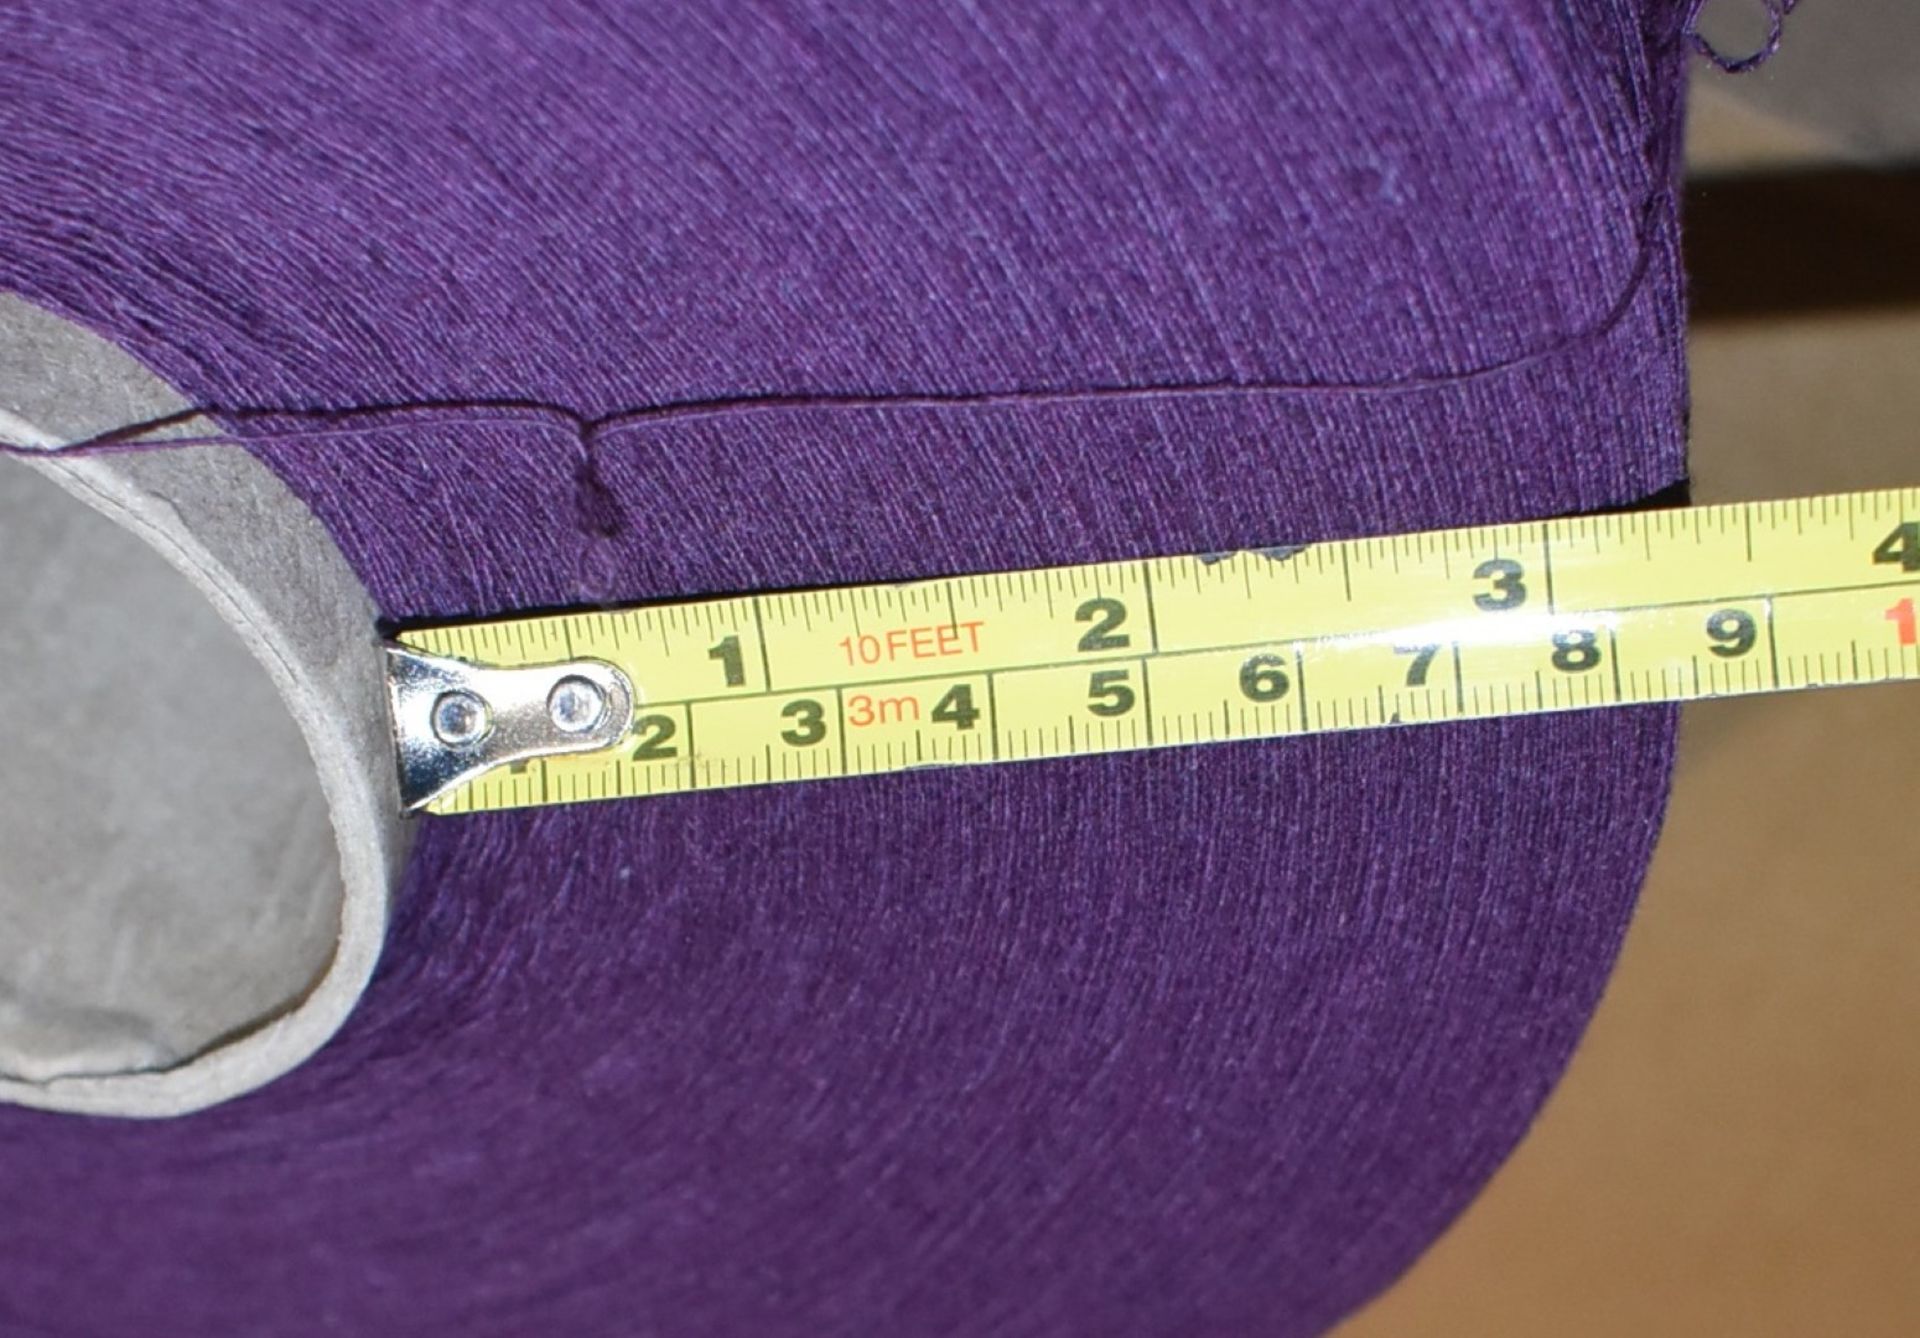 1 x Cone of 1/13 MicroCotton Knitting Yarn - Purple - Approx Weight: 2,300g - New Stock ABL Yarn - Image 13 of 13